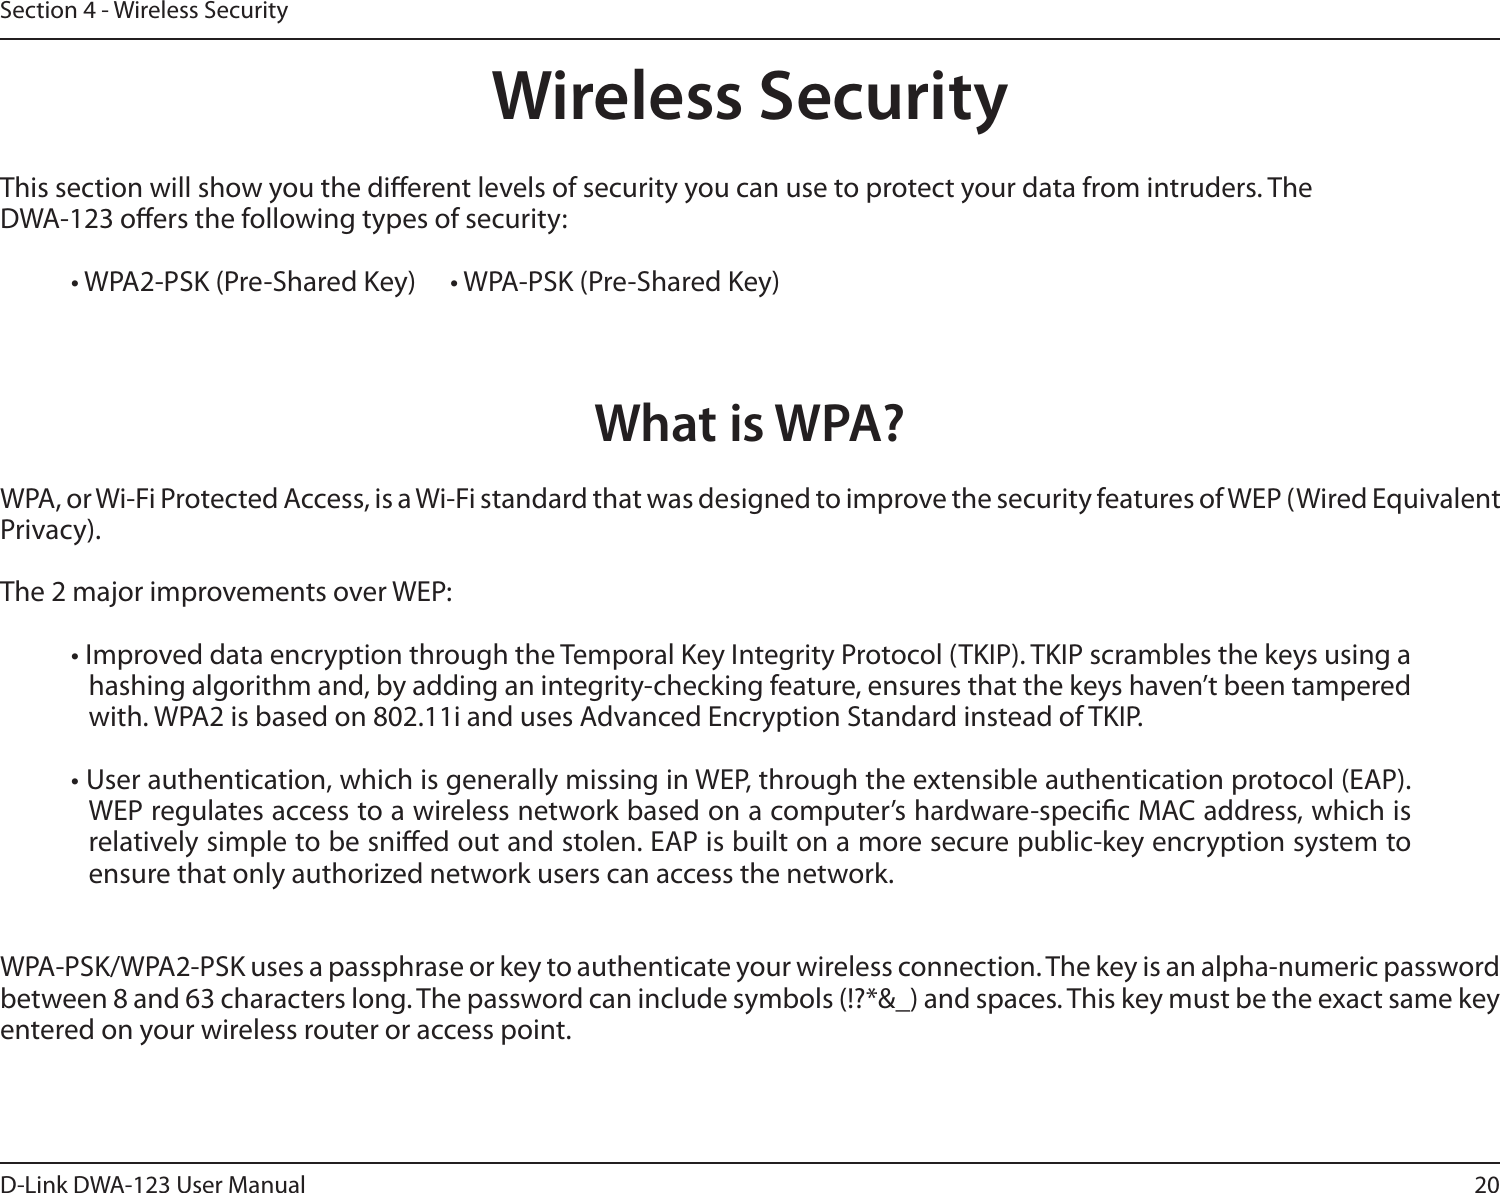 20D-Link DWA-123 User ManualSection 4 - Wireless SecurityWireless SecurityThis section will show you the dierent levels of security you can use to protect your data from intruders. The DWA-123 oers the following types of security:• WPA2-PSK (Pre-Shared Key)    • WPA-PSK (Pre-Shared Key)What is WPA?WPA, or Wi-Fi Protected Access, is a Wi-Fi standard that was designed to improve the security features of WEP (Wired Equivalent Privacy).  The 2 major improvements over WEP: • Improved data encryption through the Temporal Key Integrity Protocol (TKIP). TKIP scrambles the keys using a hashing algorithm and, by adding an integrity-checking feature, ensures that the keys haven’t been tampered with. WPA2 is based on 802.11i and uses Advanced Encryption Standard instead of TKIP.• User authentication, which is generally missing in WEP, through the extensible authentication protocol (EAP). WEP regulates access to a wireless network based on a computer’s hardware-specic MAC address, which is relatively simple to be snied out and stolen. EAP is built on a more secure public-key encryption system to ensure that only authorized network users can access the network.WPA-PSK/WPA2-PSK uses a passphrase or key to authenticate your wireless connection. The key is an alpha-numeric password between 8 and 63 characters long. The password can include symbols (!?*&amp;_) and spaces. This key must be the exact same key entered on your wireless router or access point.